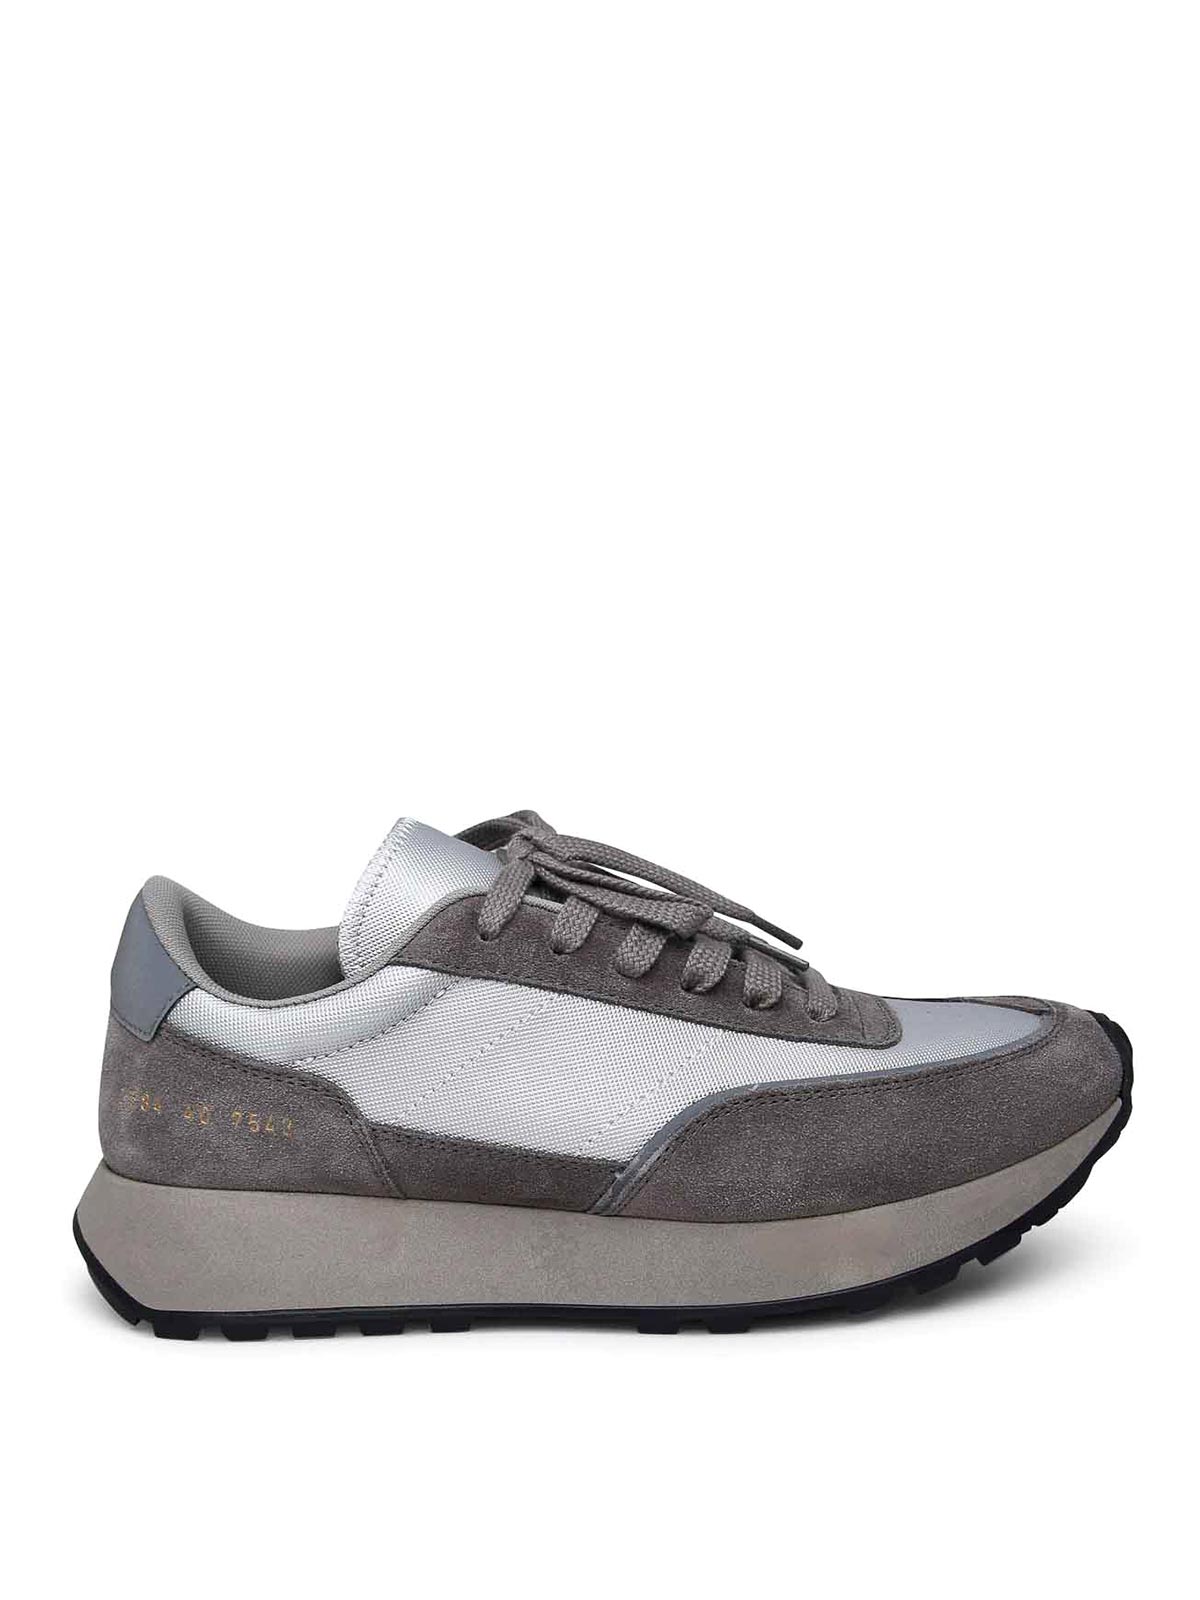 COMMON PROJECTS ZAPATILLAS - GRIS